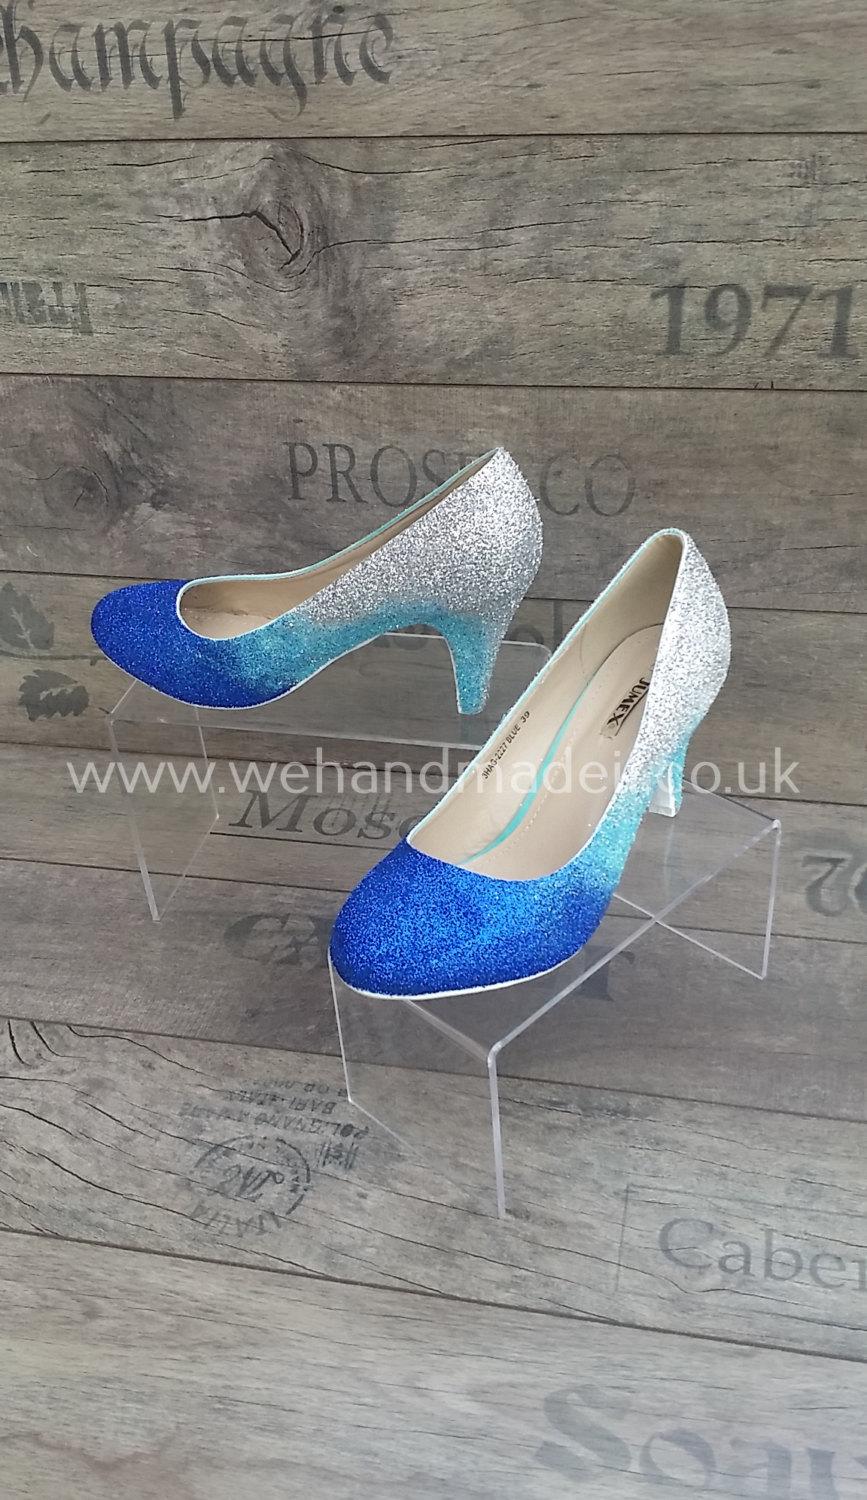 Wedding - Custom made blue to silver graded glitter shoes - any style or size.  Wedding shoes, prom shoes, custom glitter shoes made to order